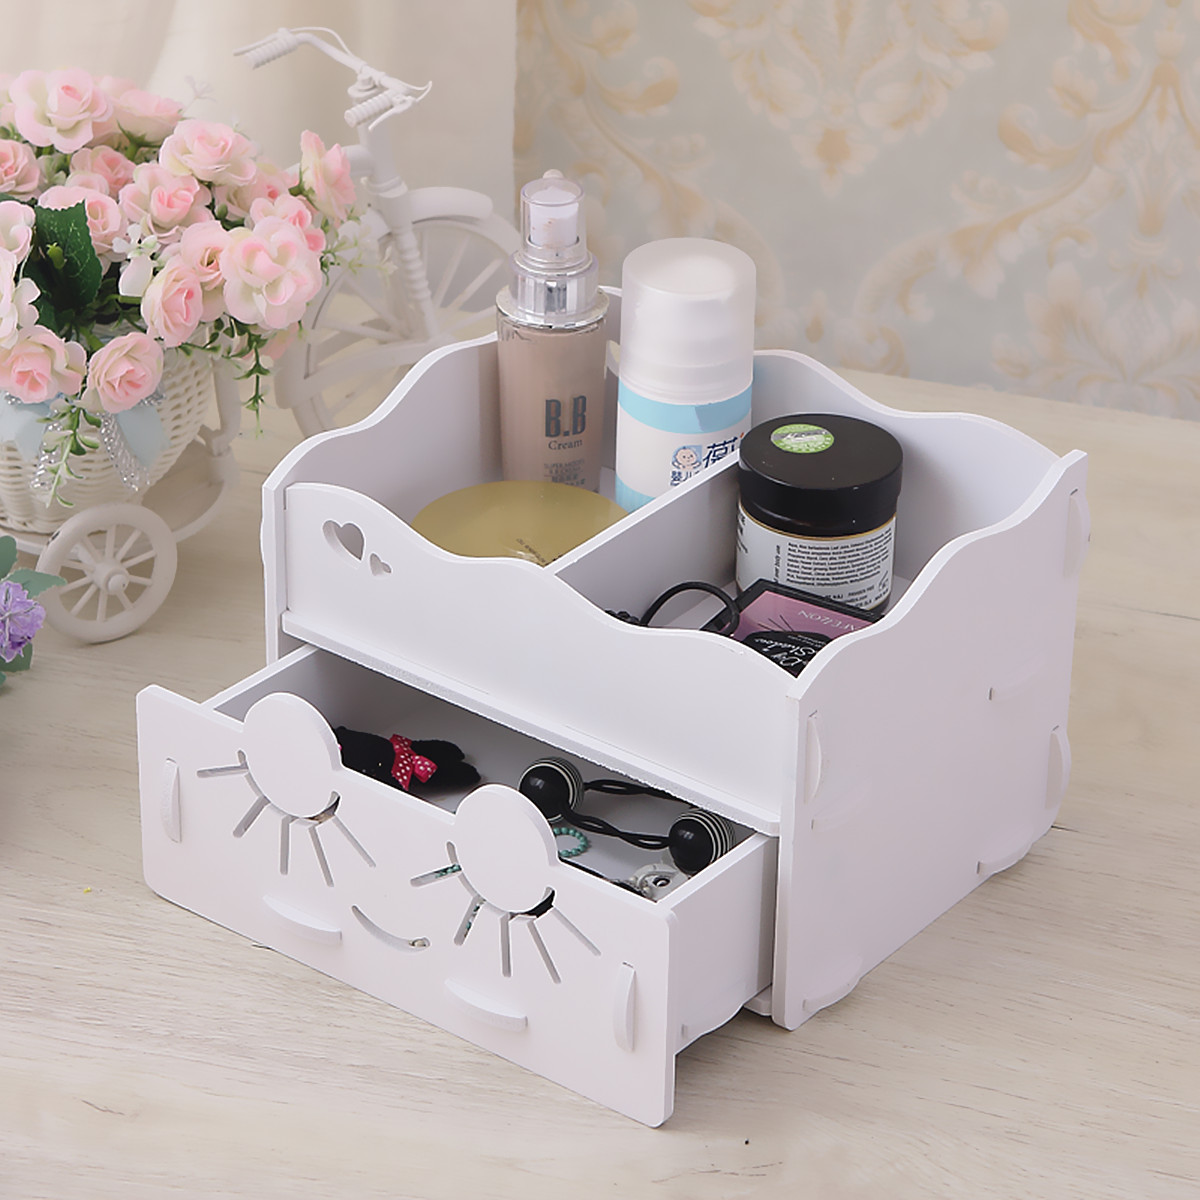 Smiling-Face-Cute-Wooden-White-Makeup-Organizer-Neat-Table-Collecting-Case-Cosmetics-Tools-1123232-3